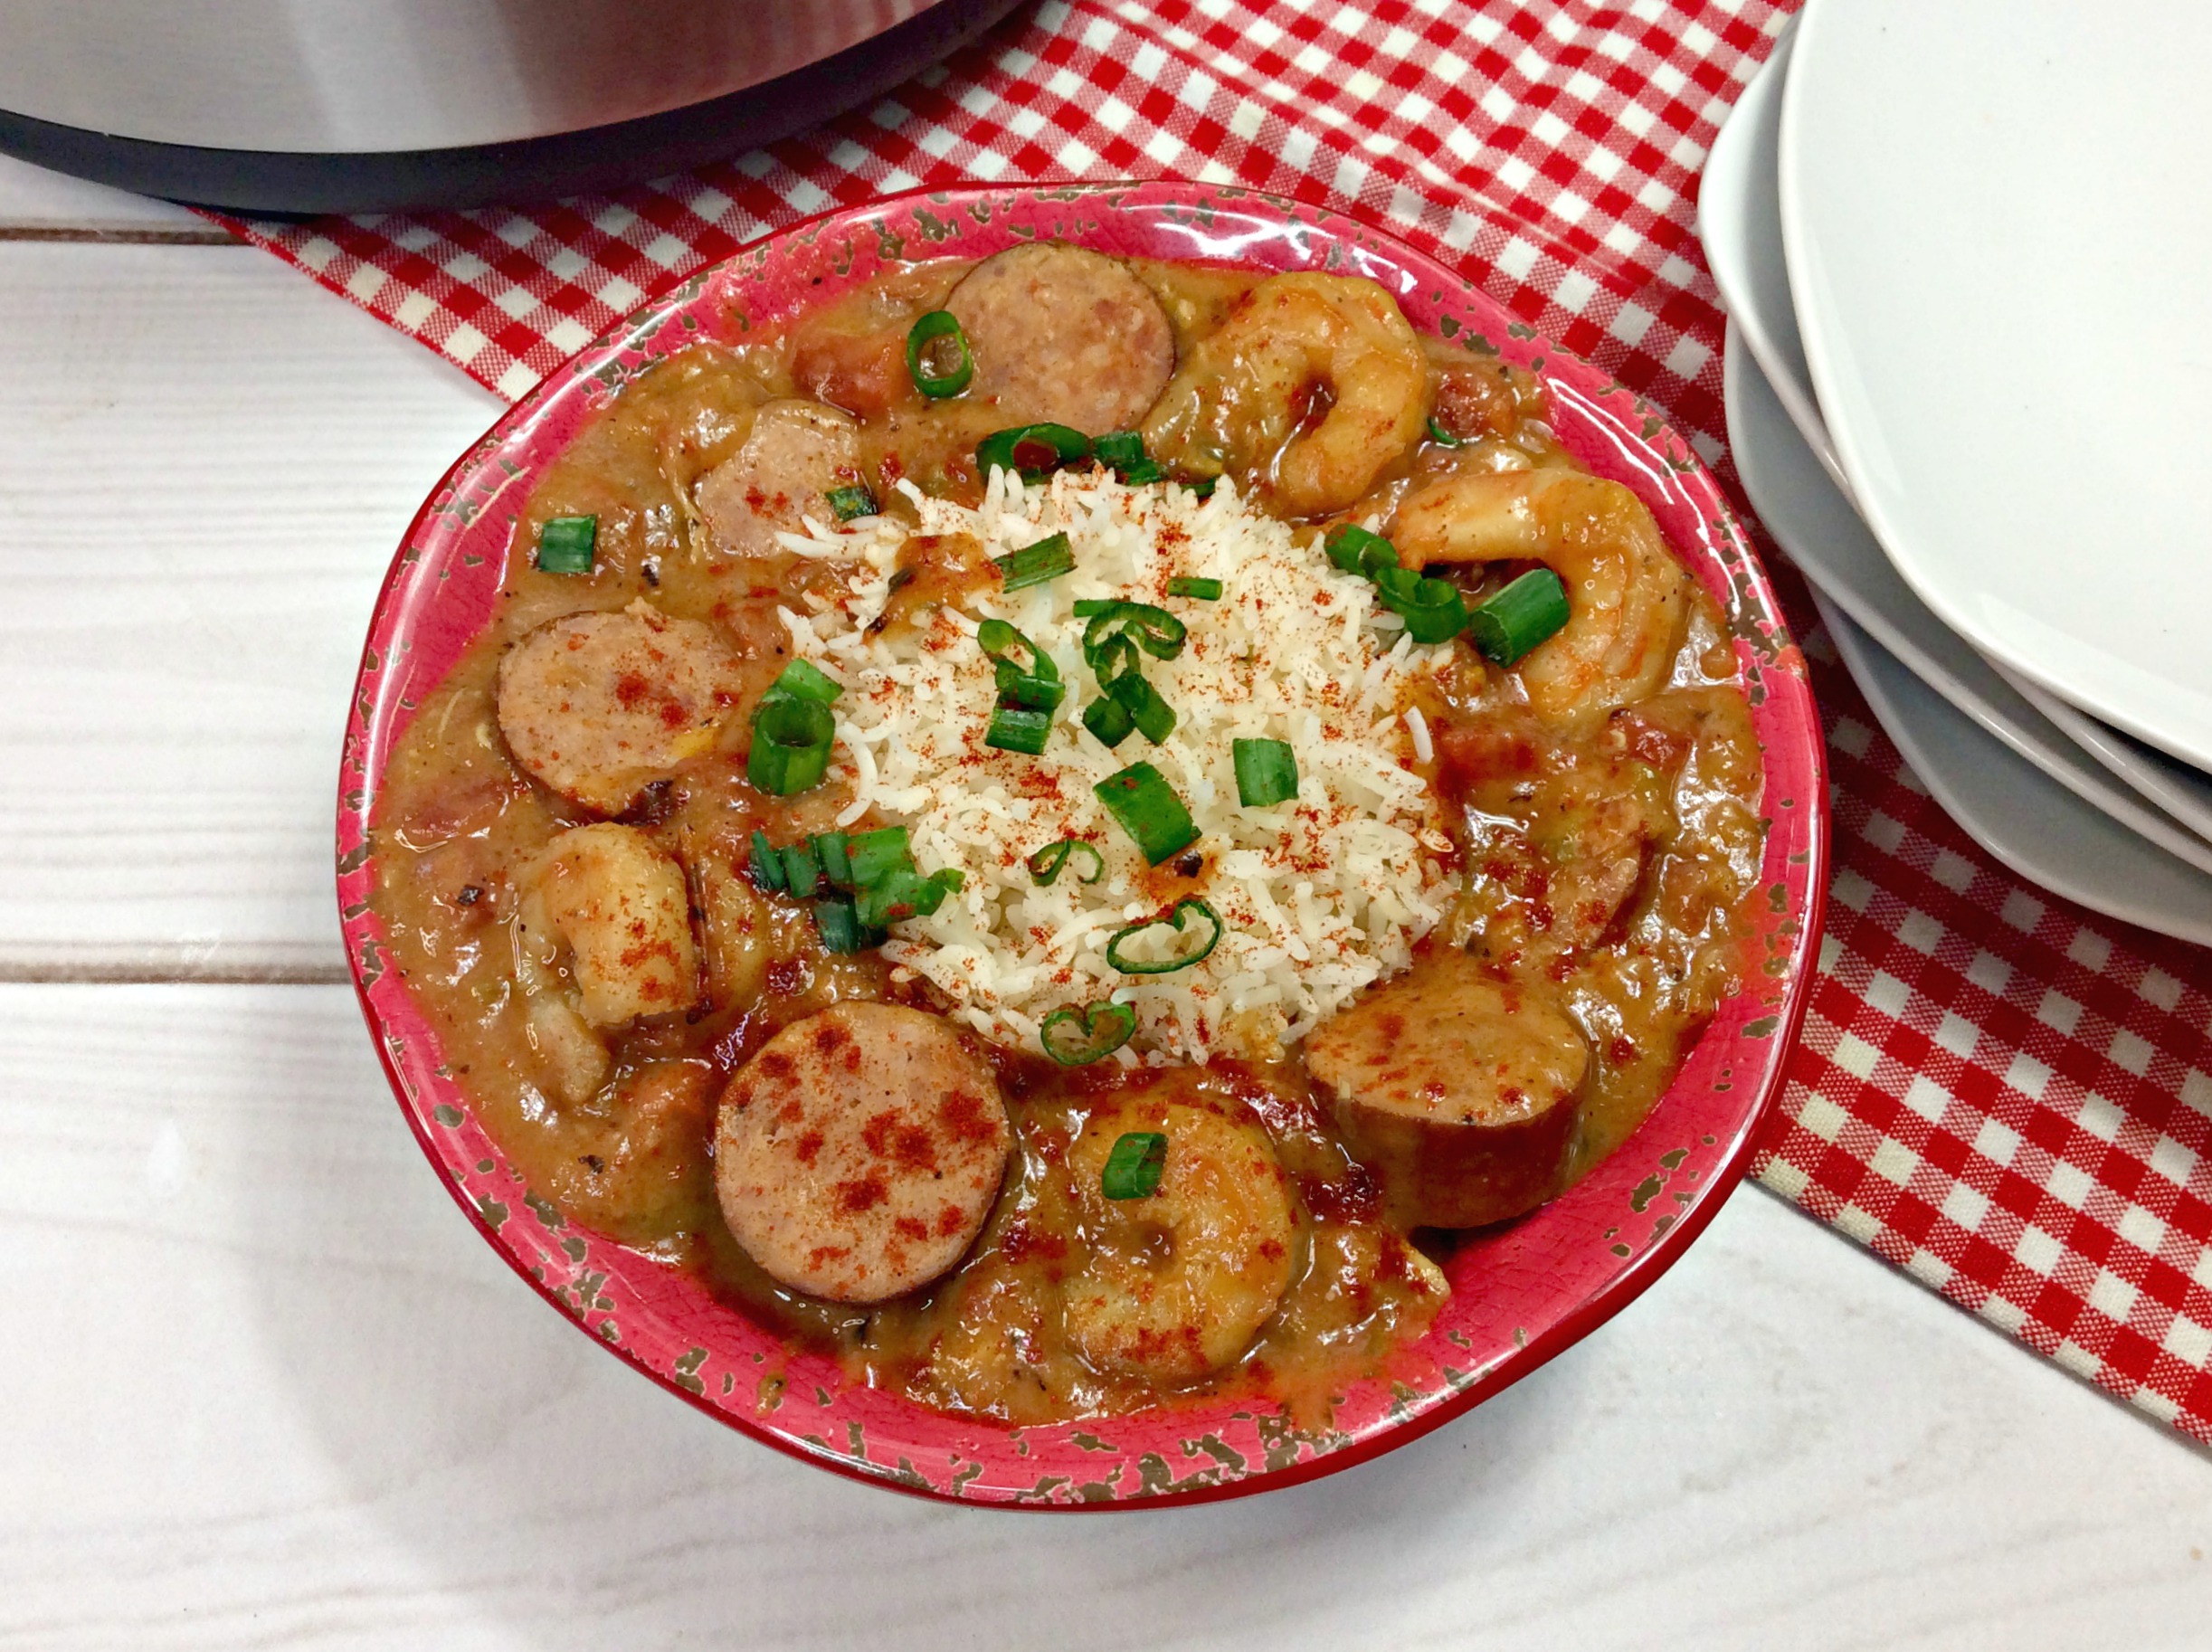 Instant Pot Gumbo garnished with chives.